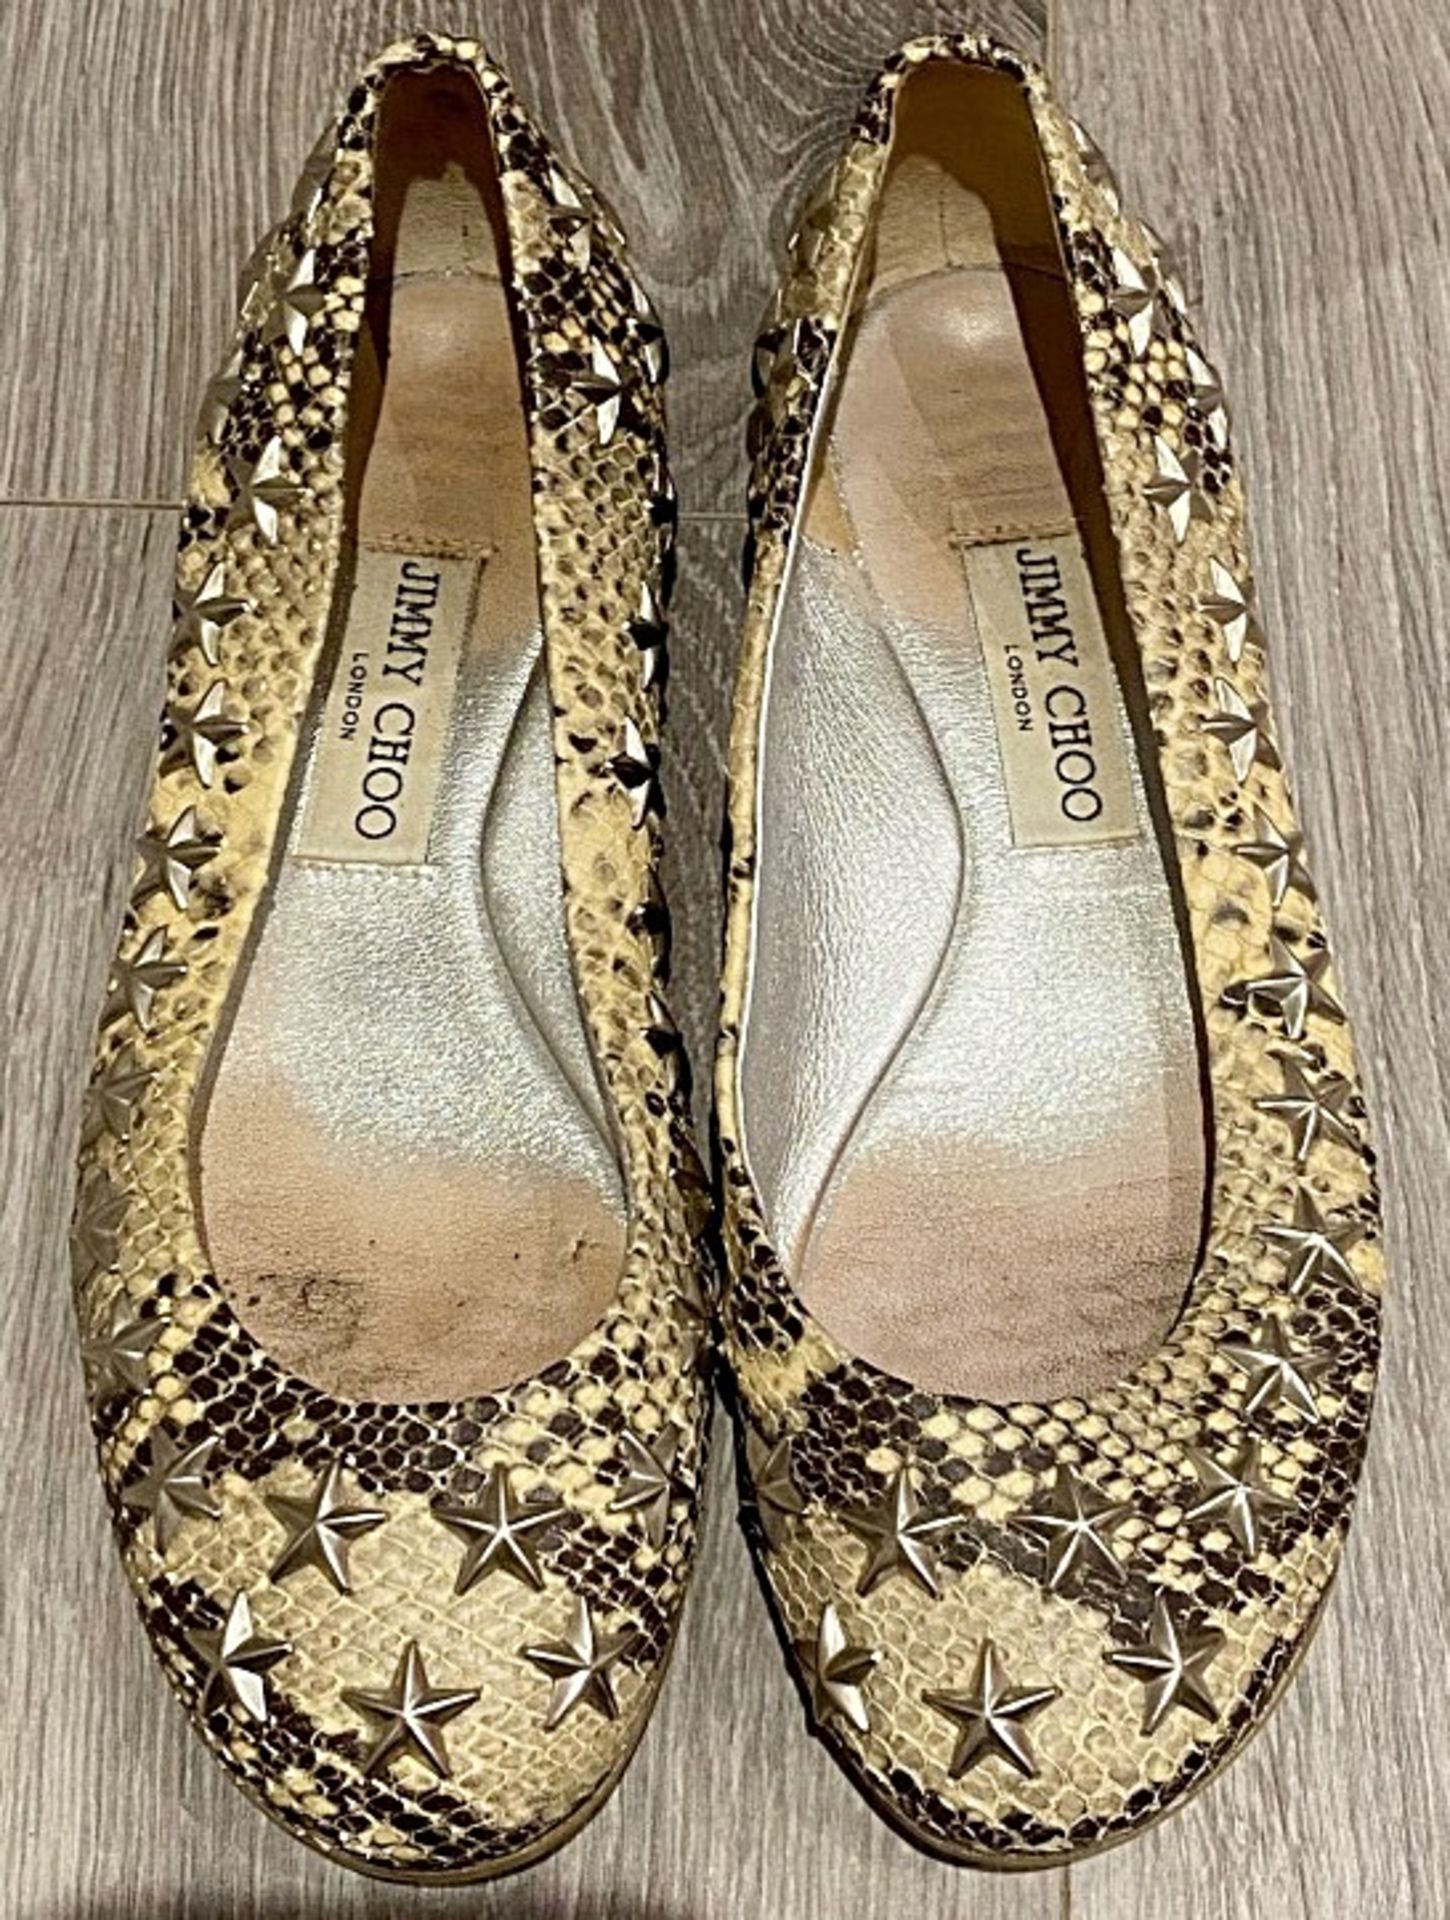 1 x Pair Of Genuine Jimmy Choo Flats In Snake Print - Size: 36 - Preowned in Very Good Condition - R